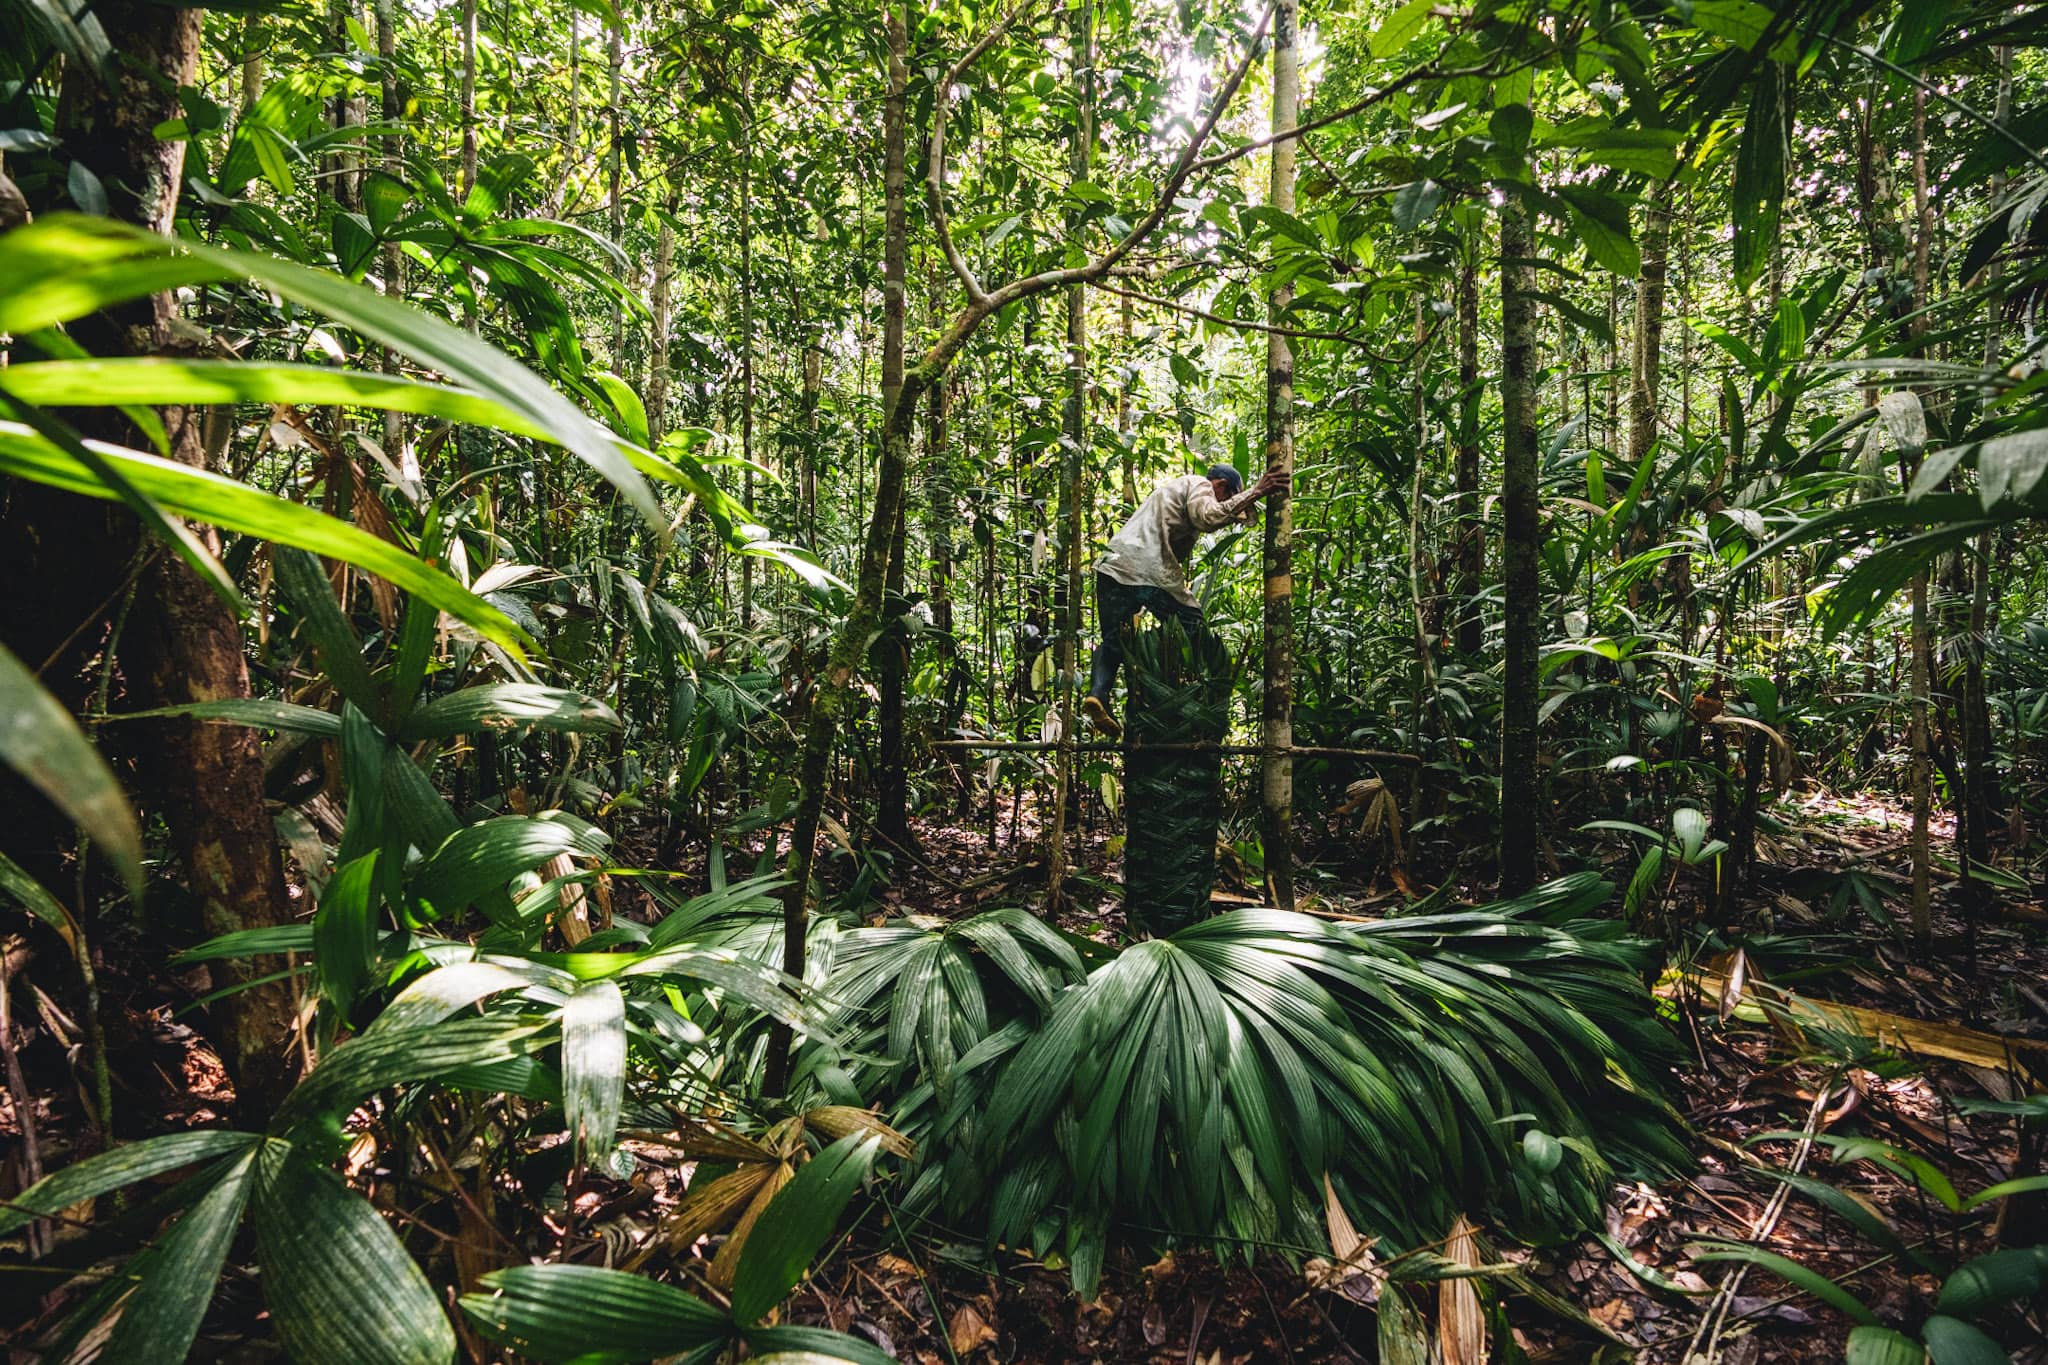 indigenous man harvesting palms in the colombian amazon